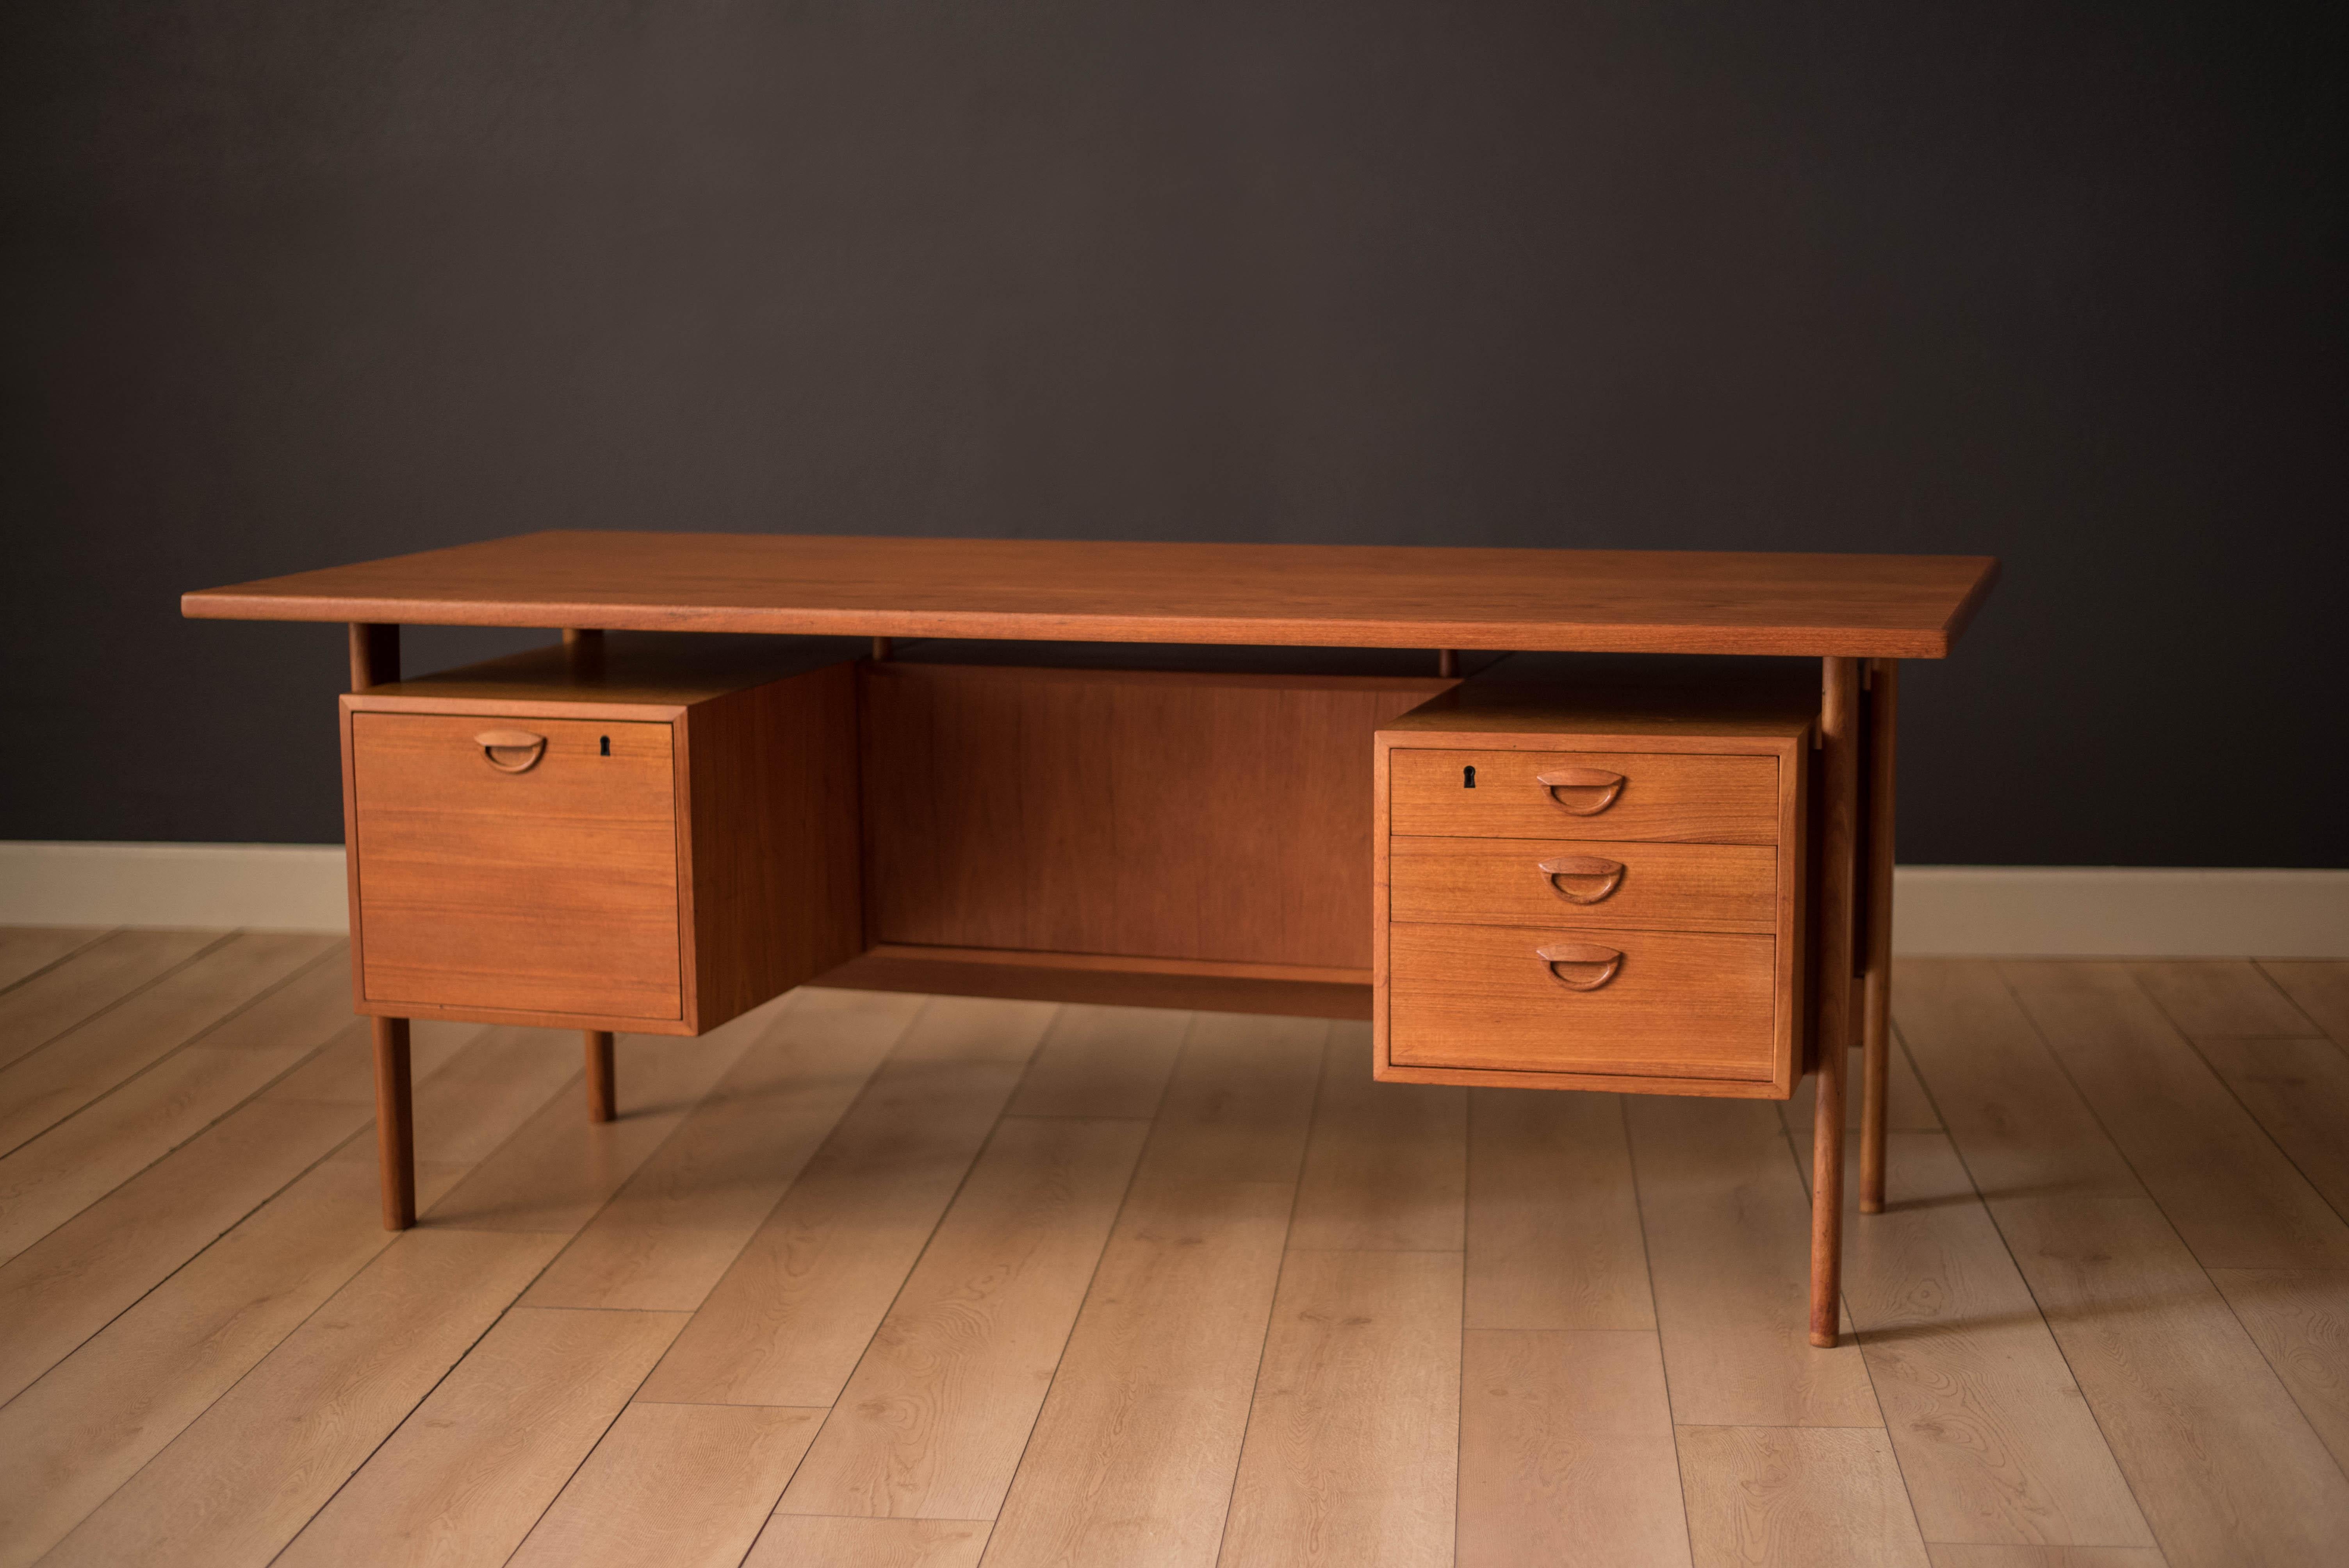 Mid century executive desk designed by Kai Kristiansen in teak. Offers a desktop with plenty of work surface space equipped with three dovetailed drawers and a locking filing cabinet with signature sculpted handles. This unique piece can be